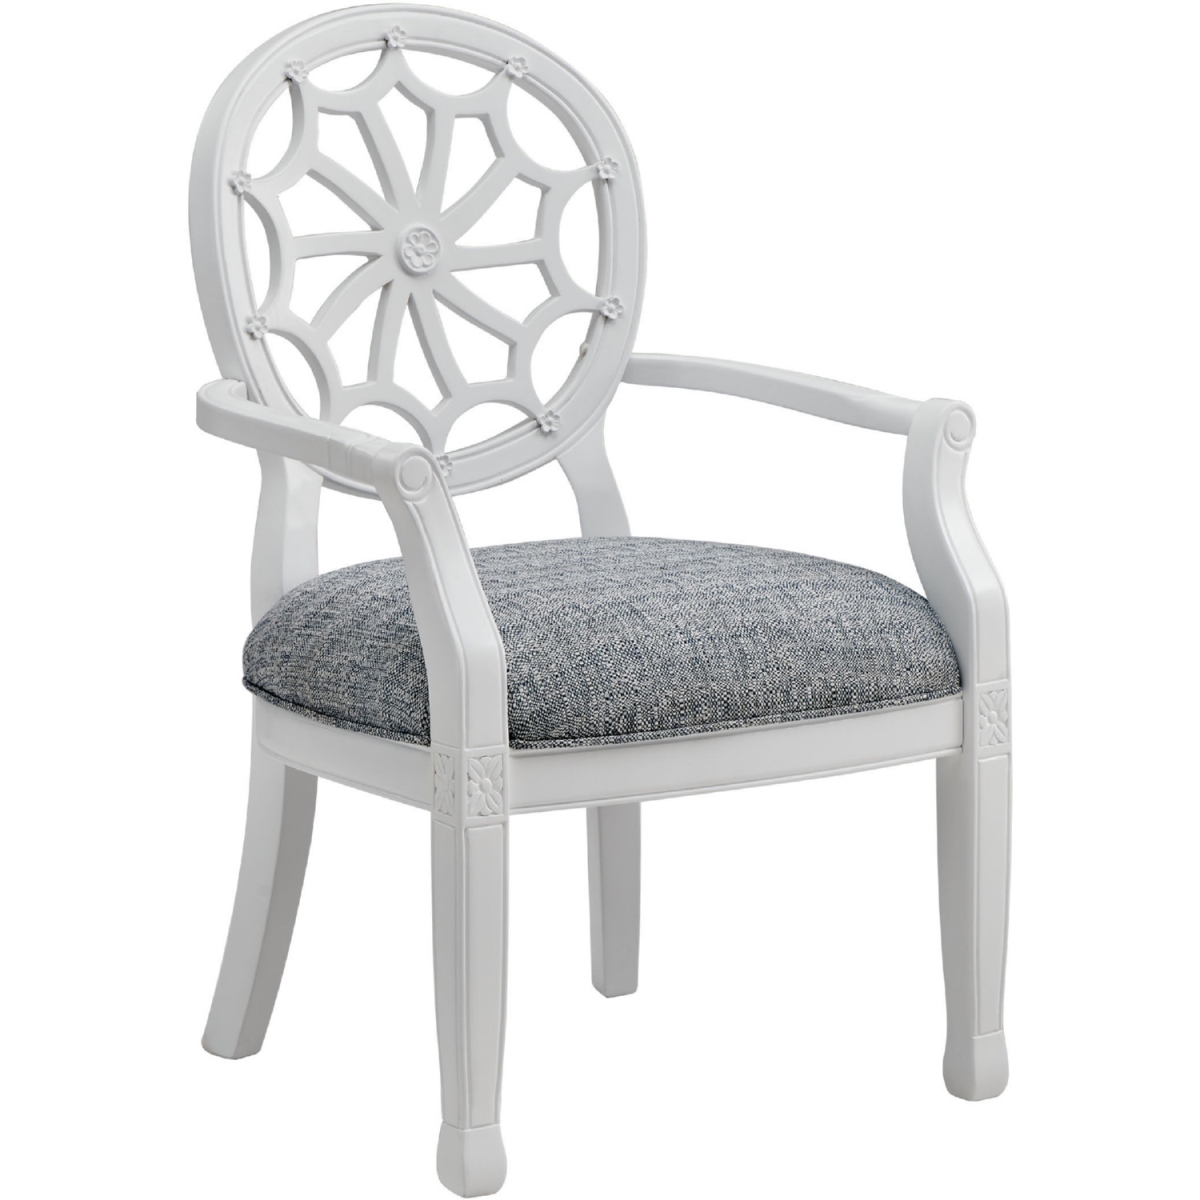 D1226s19 Spider Web Back Accent Chair, White